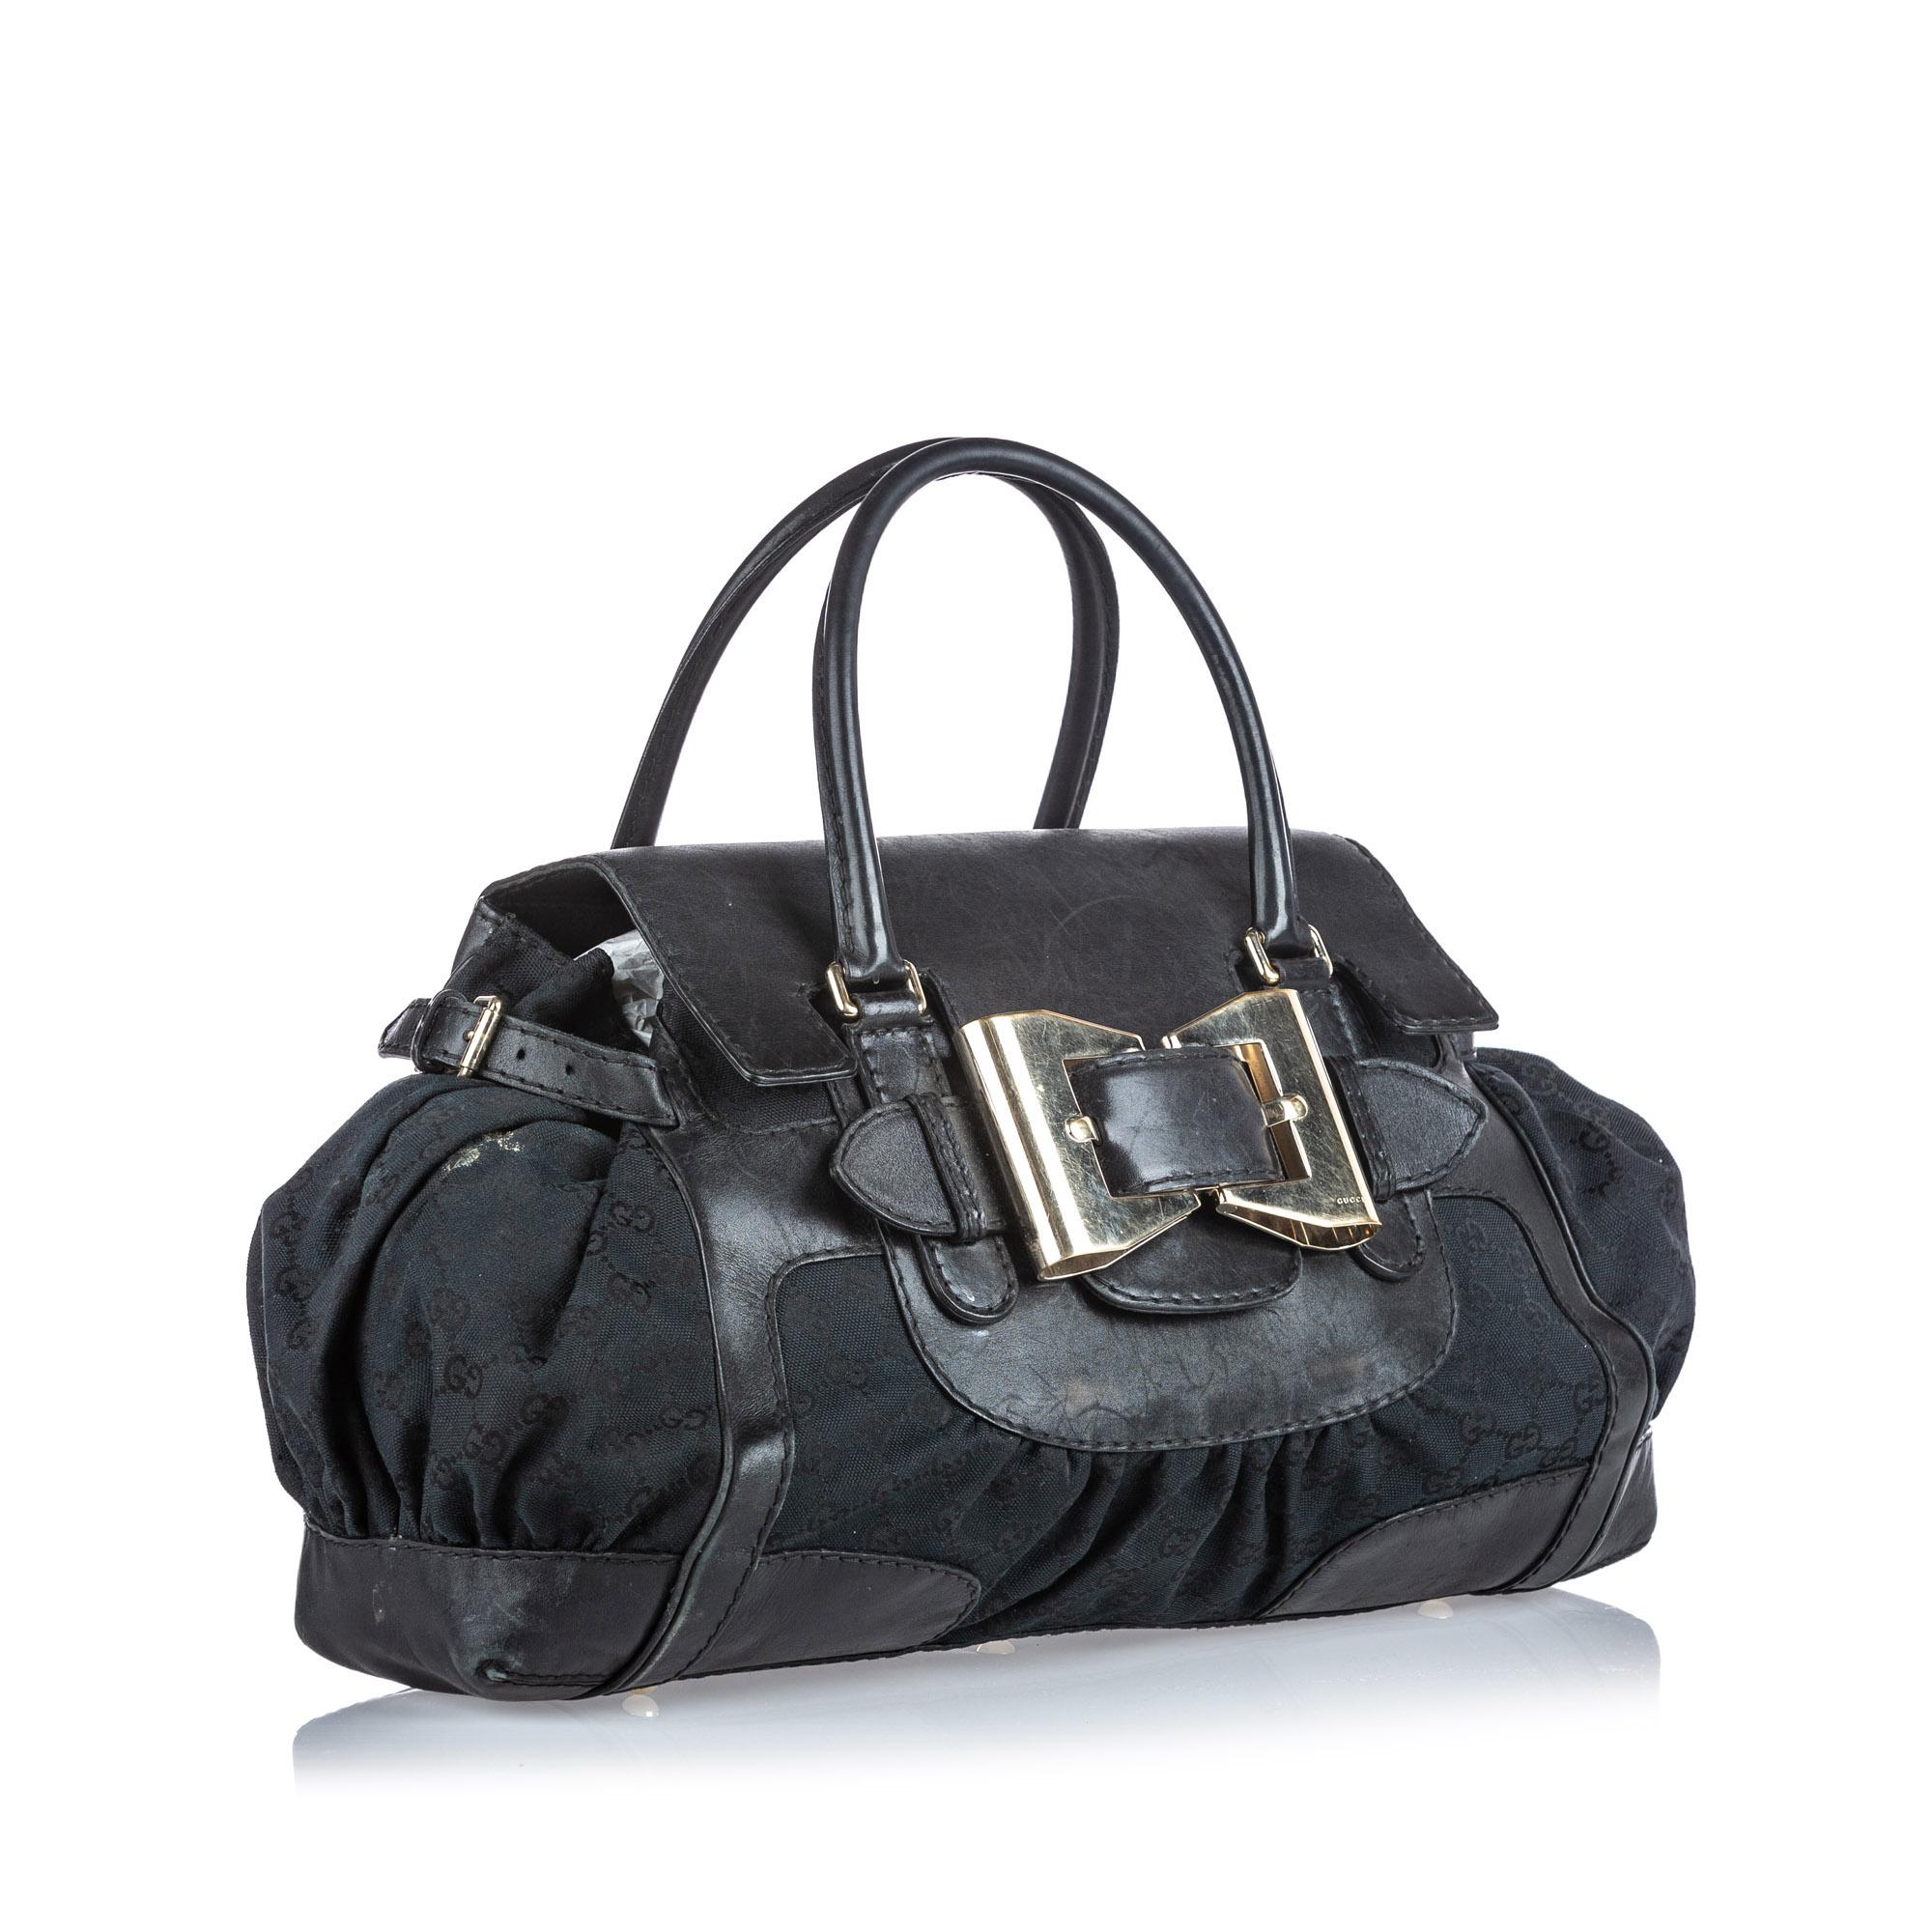 The Dialux Queen handbag features a canvas body with leather trim, an exterior pocket, rolled leather handles, a front flap with buckle details, an open top, and interior zip and slip pockets. It carries as B+ condition rating.

Inclusions: 
This